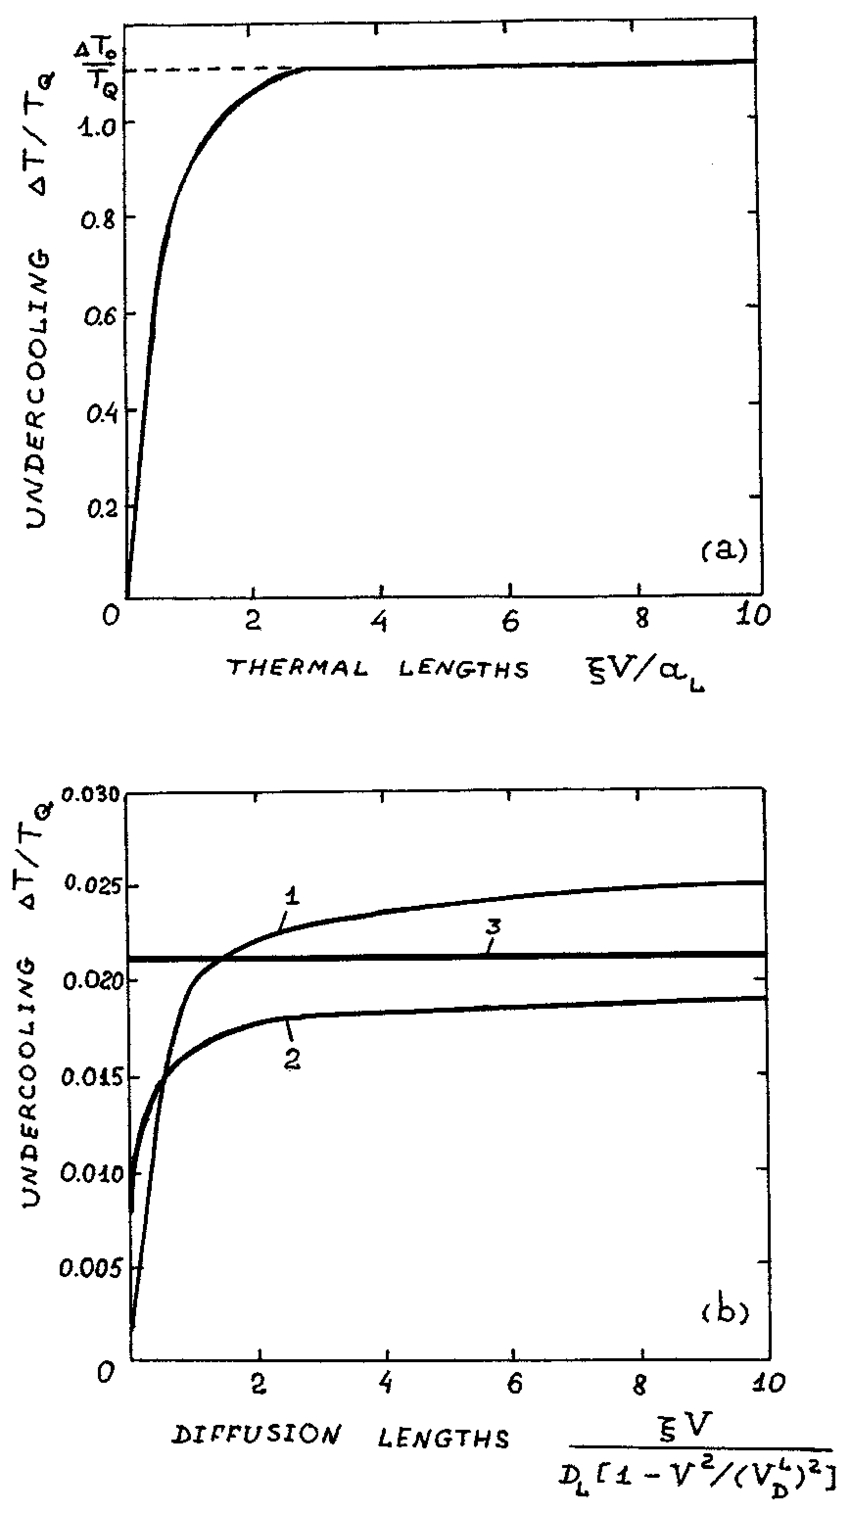 Ag Cu Phase Diagram The Undercooling T Distribution In The Liquid Phase Of Ag 1 Wt